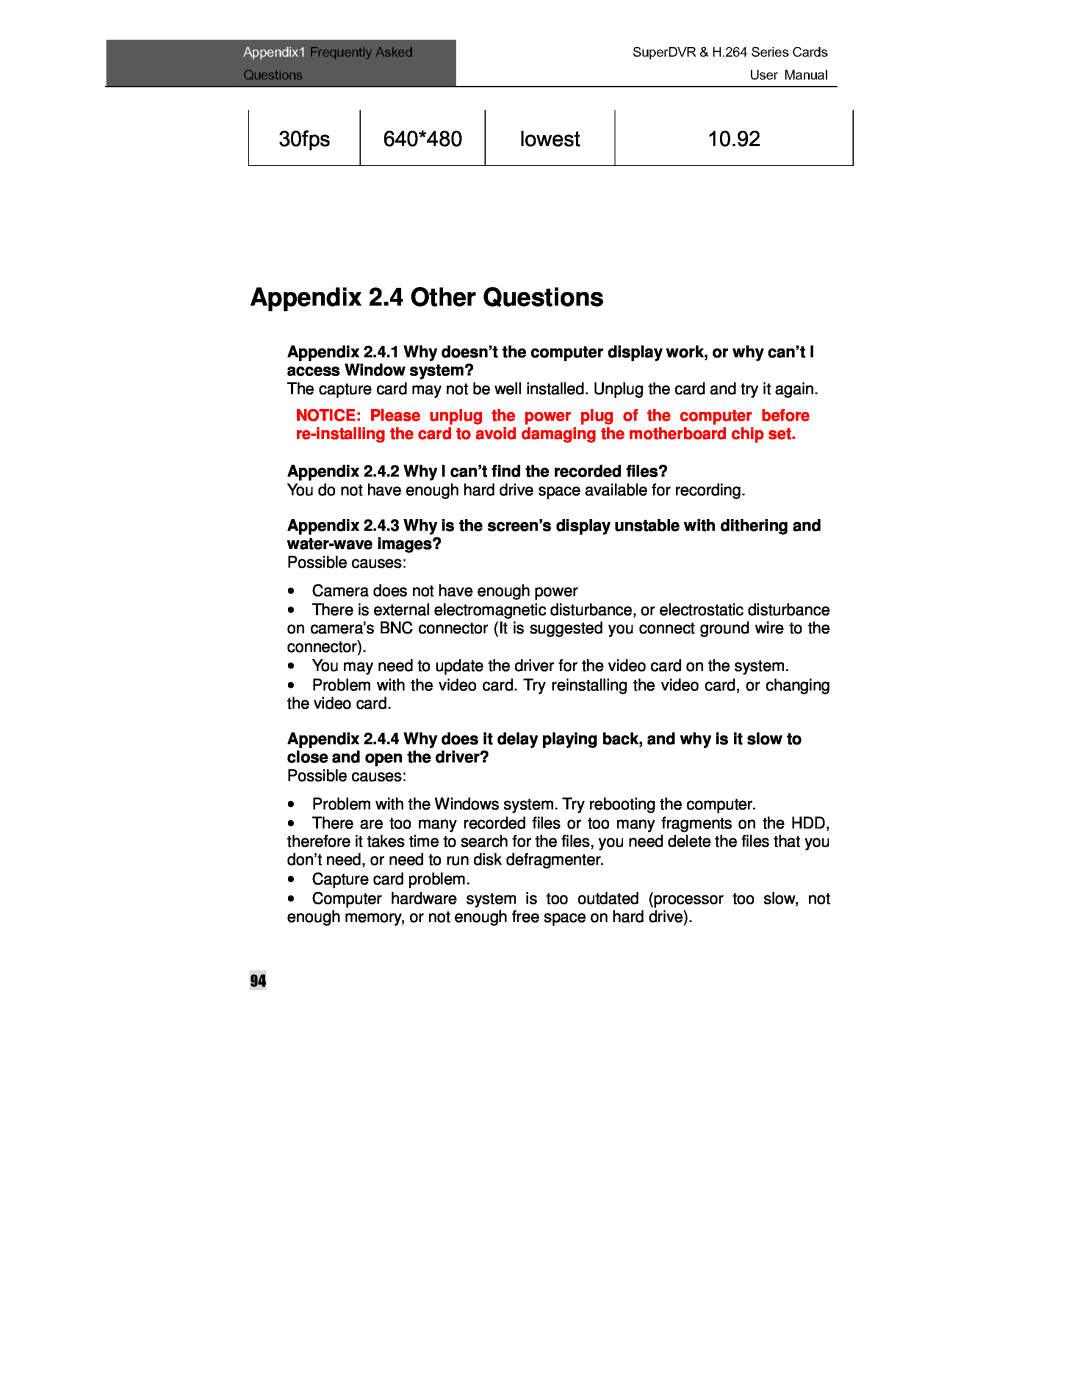 Q-See QSDT8PCRC manual Appendix 2.4 Other Questions, User Manual, Appendix 2.4.2 Why I can’t find the recorded files? 